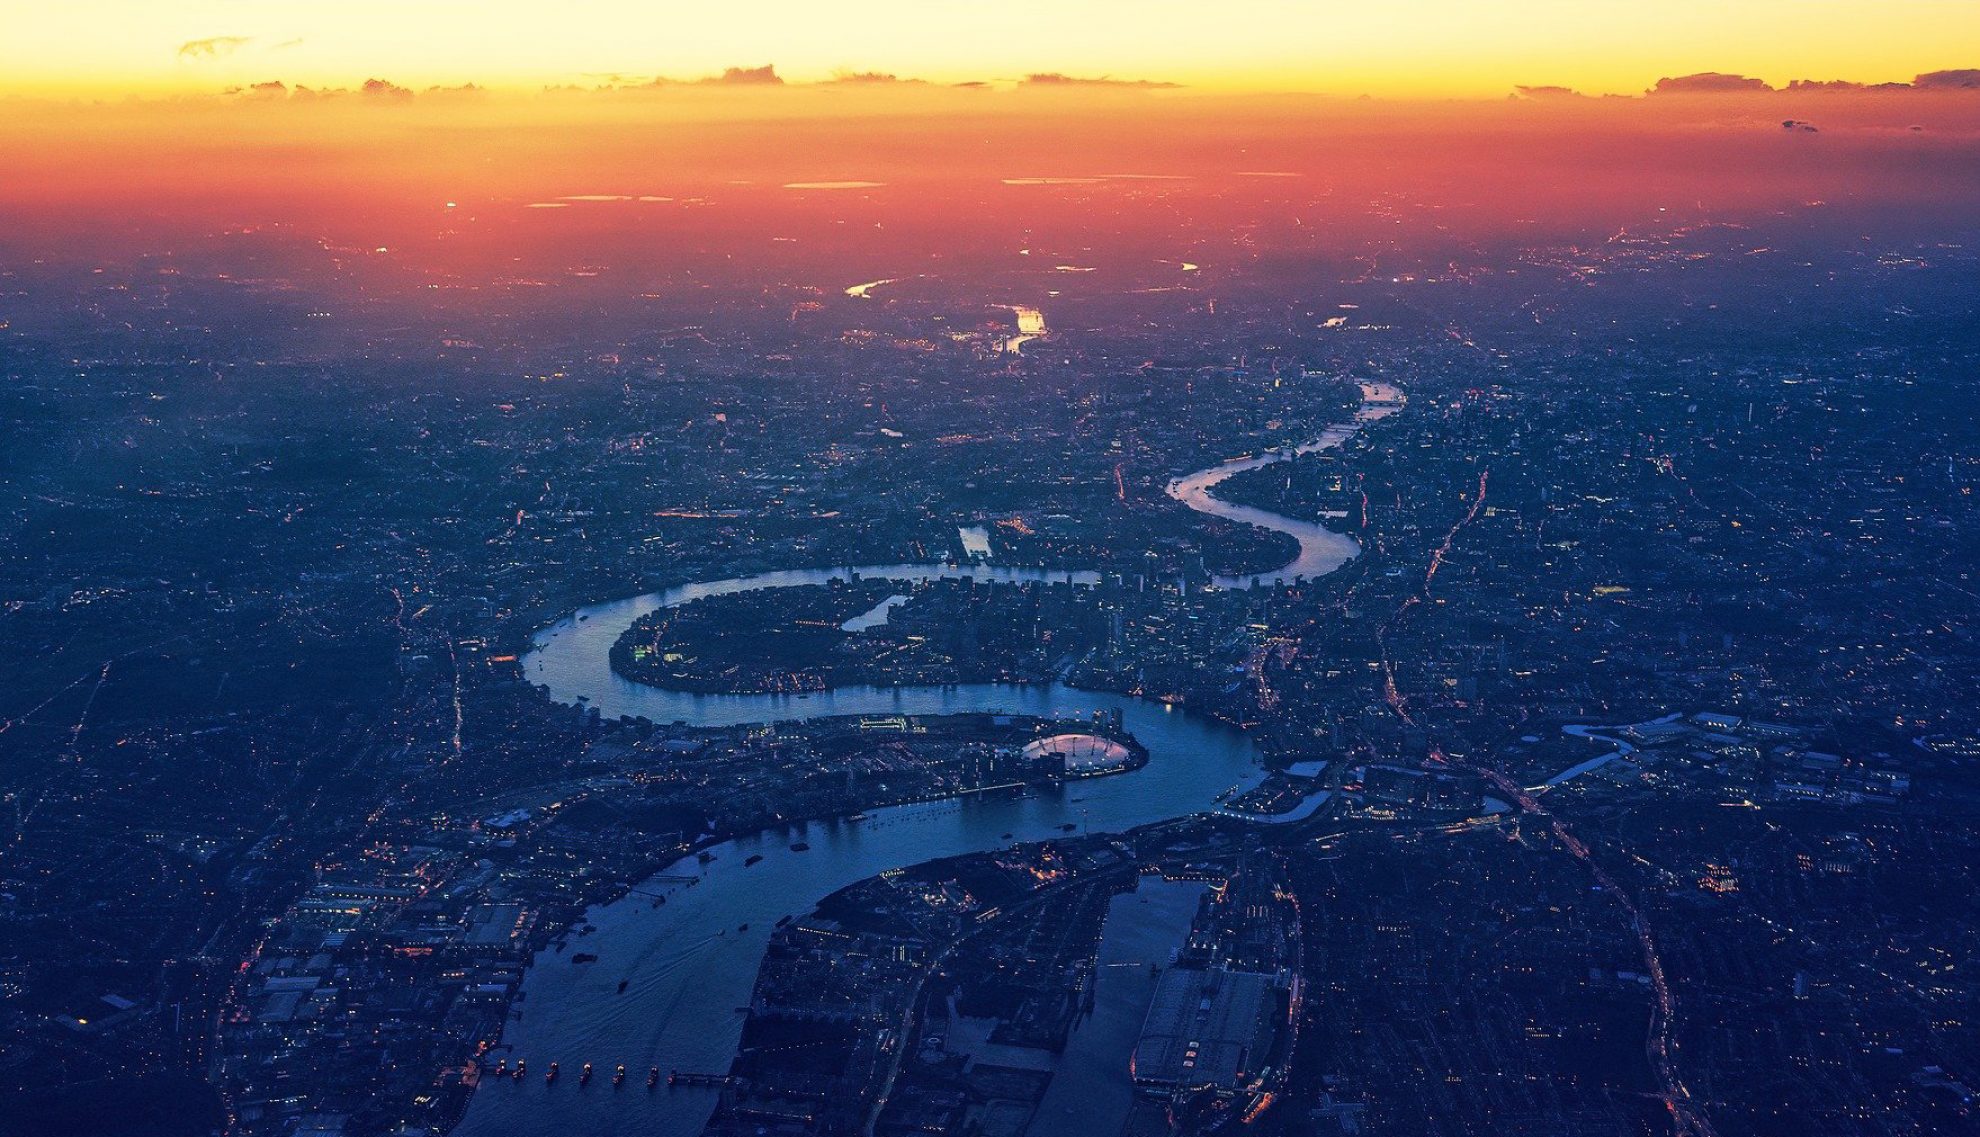 Aerial view over London at sunset